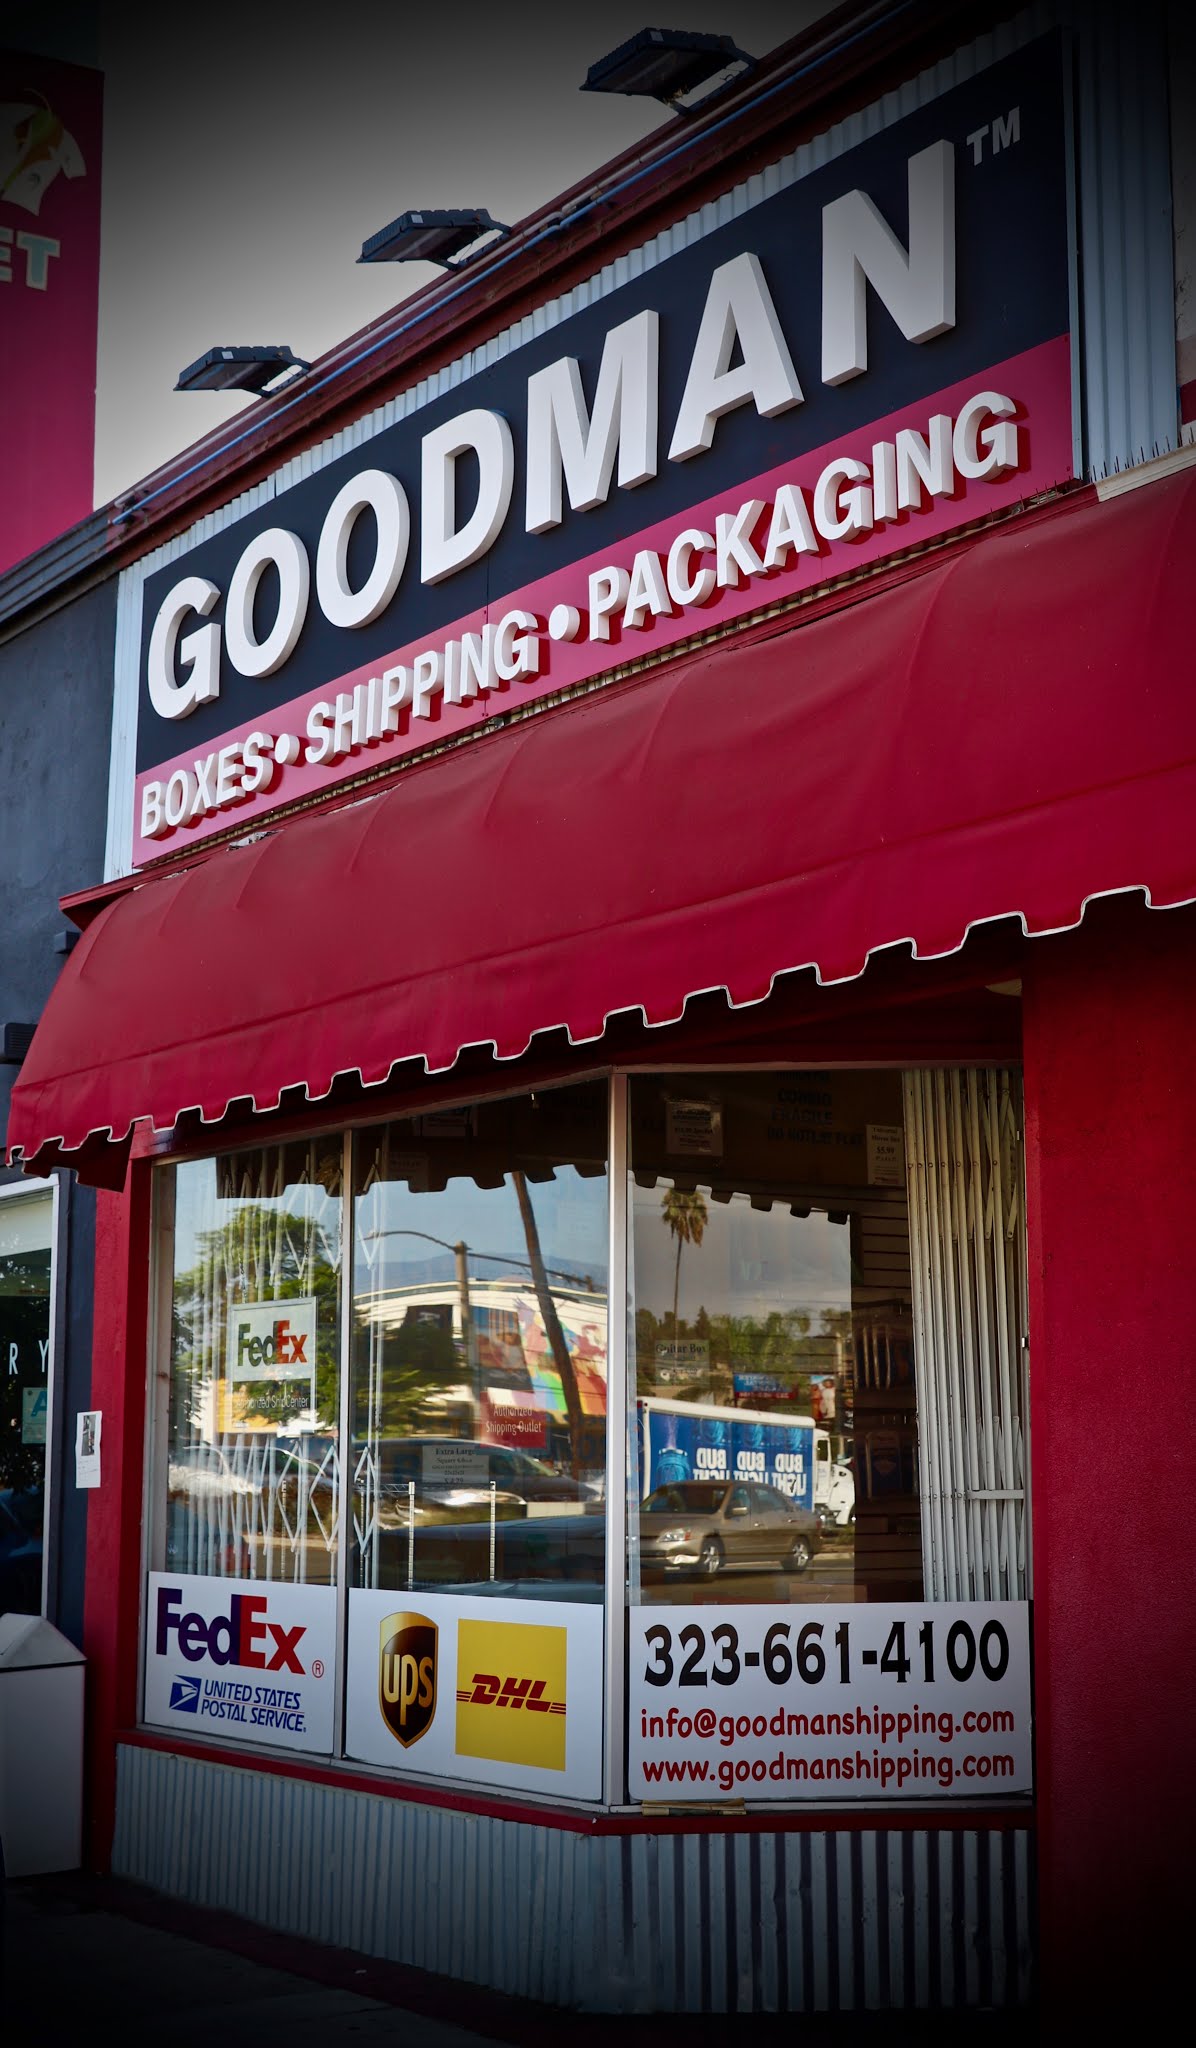 Goodman Packing & Shipping-Atwater: UPS shipping store, packing, crating, moving and shipping supplies serving Atwater Village and Glendale